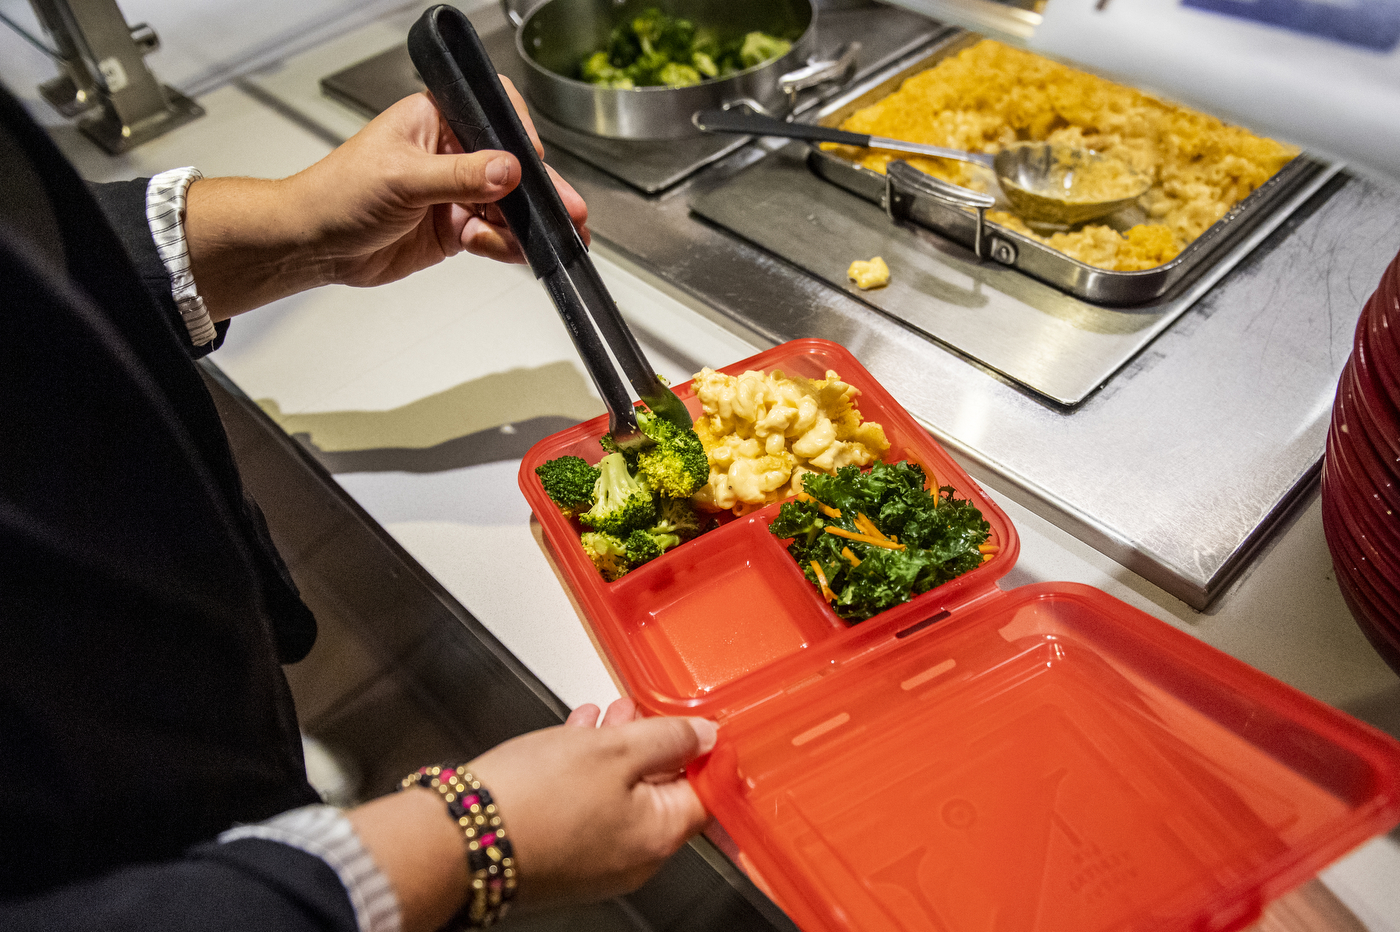 A person is using food prongs to place broccoli inside a red food container.